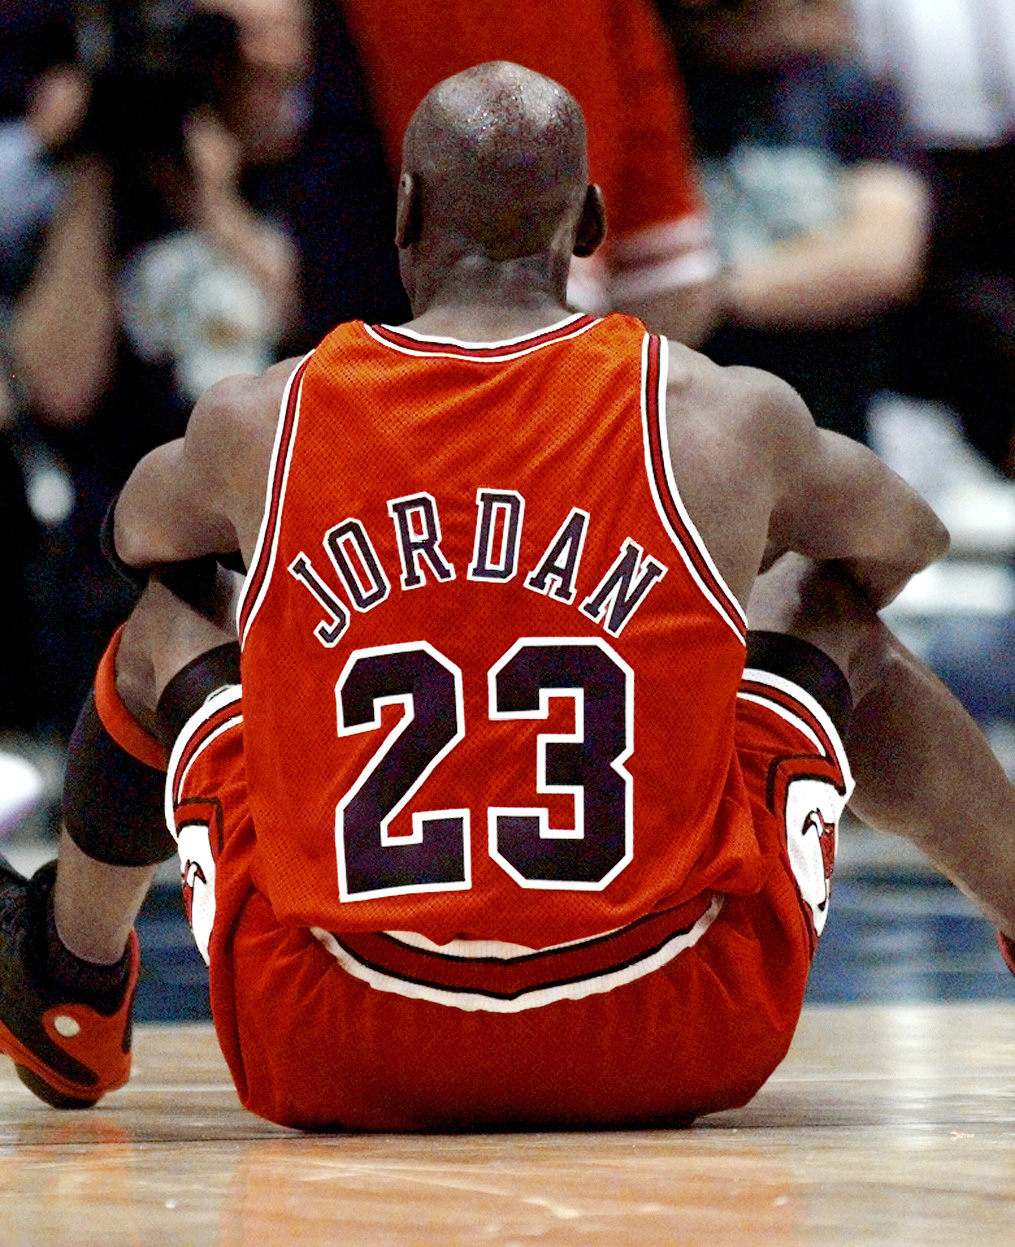 Michael Jordan's jersey from the iconic 1998 NBA Finals could fetch $5  million at Sotheby's auction - Luxurylaunches